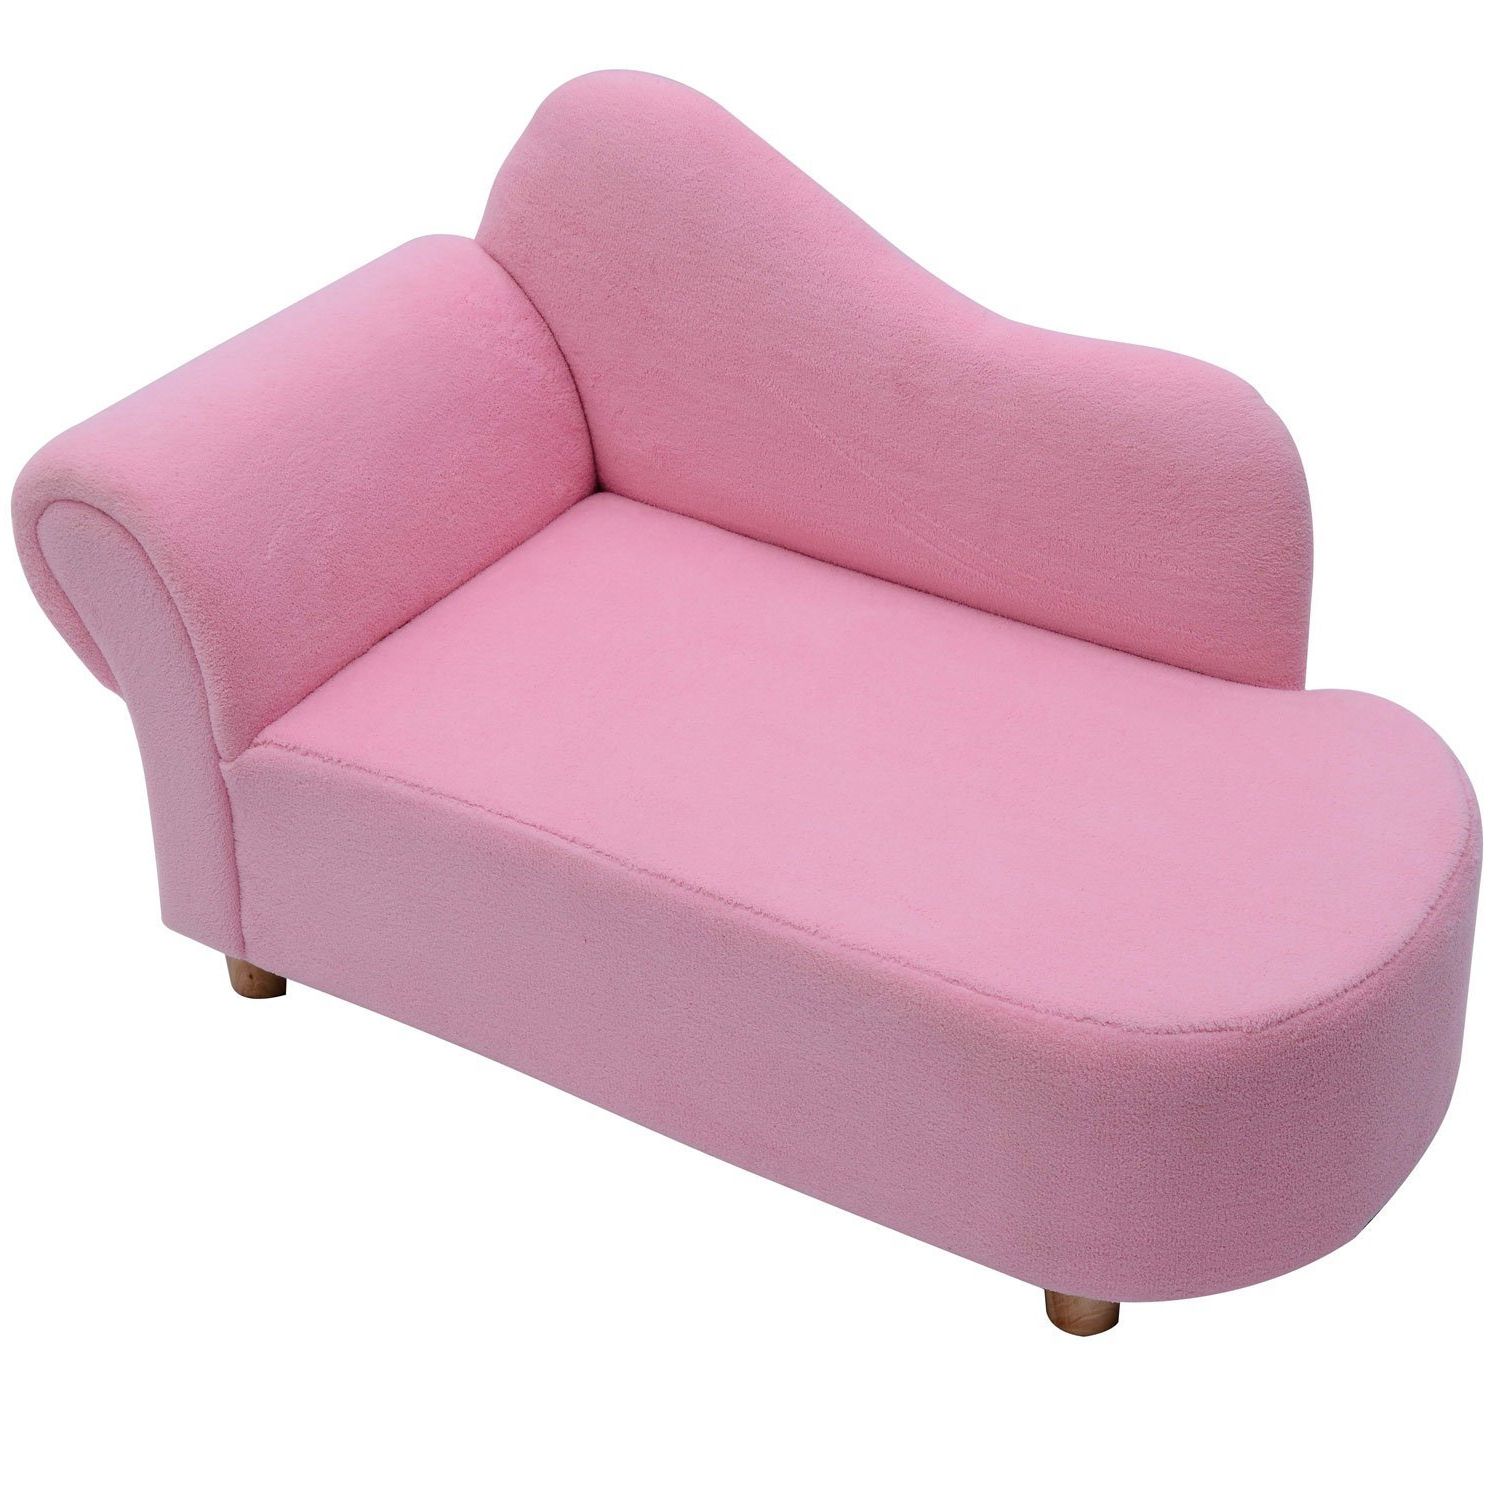 Most Popular Childrens Sofa Bed Chairs With Regard To Childrens Sofa Beds Chairs – Design The Look And Shape Of The (View 1 of 20)